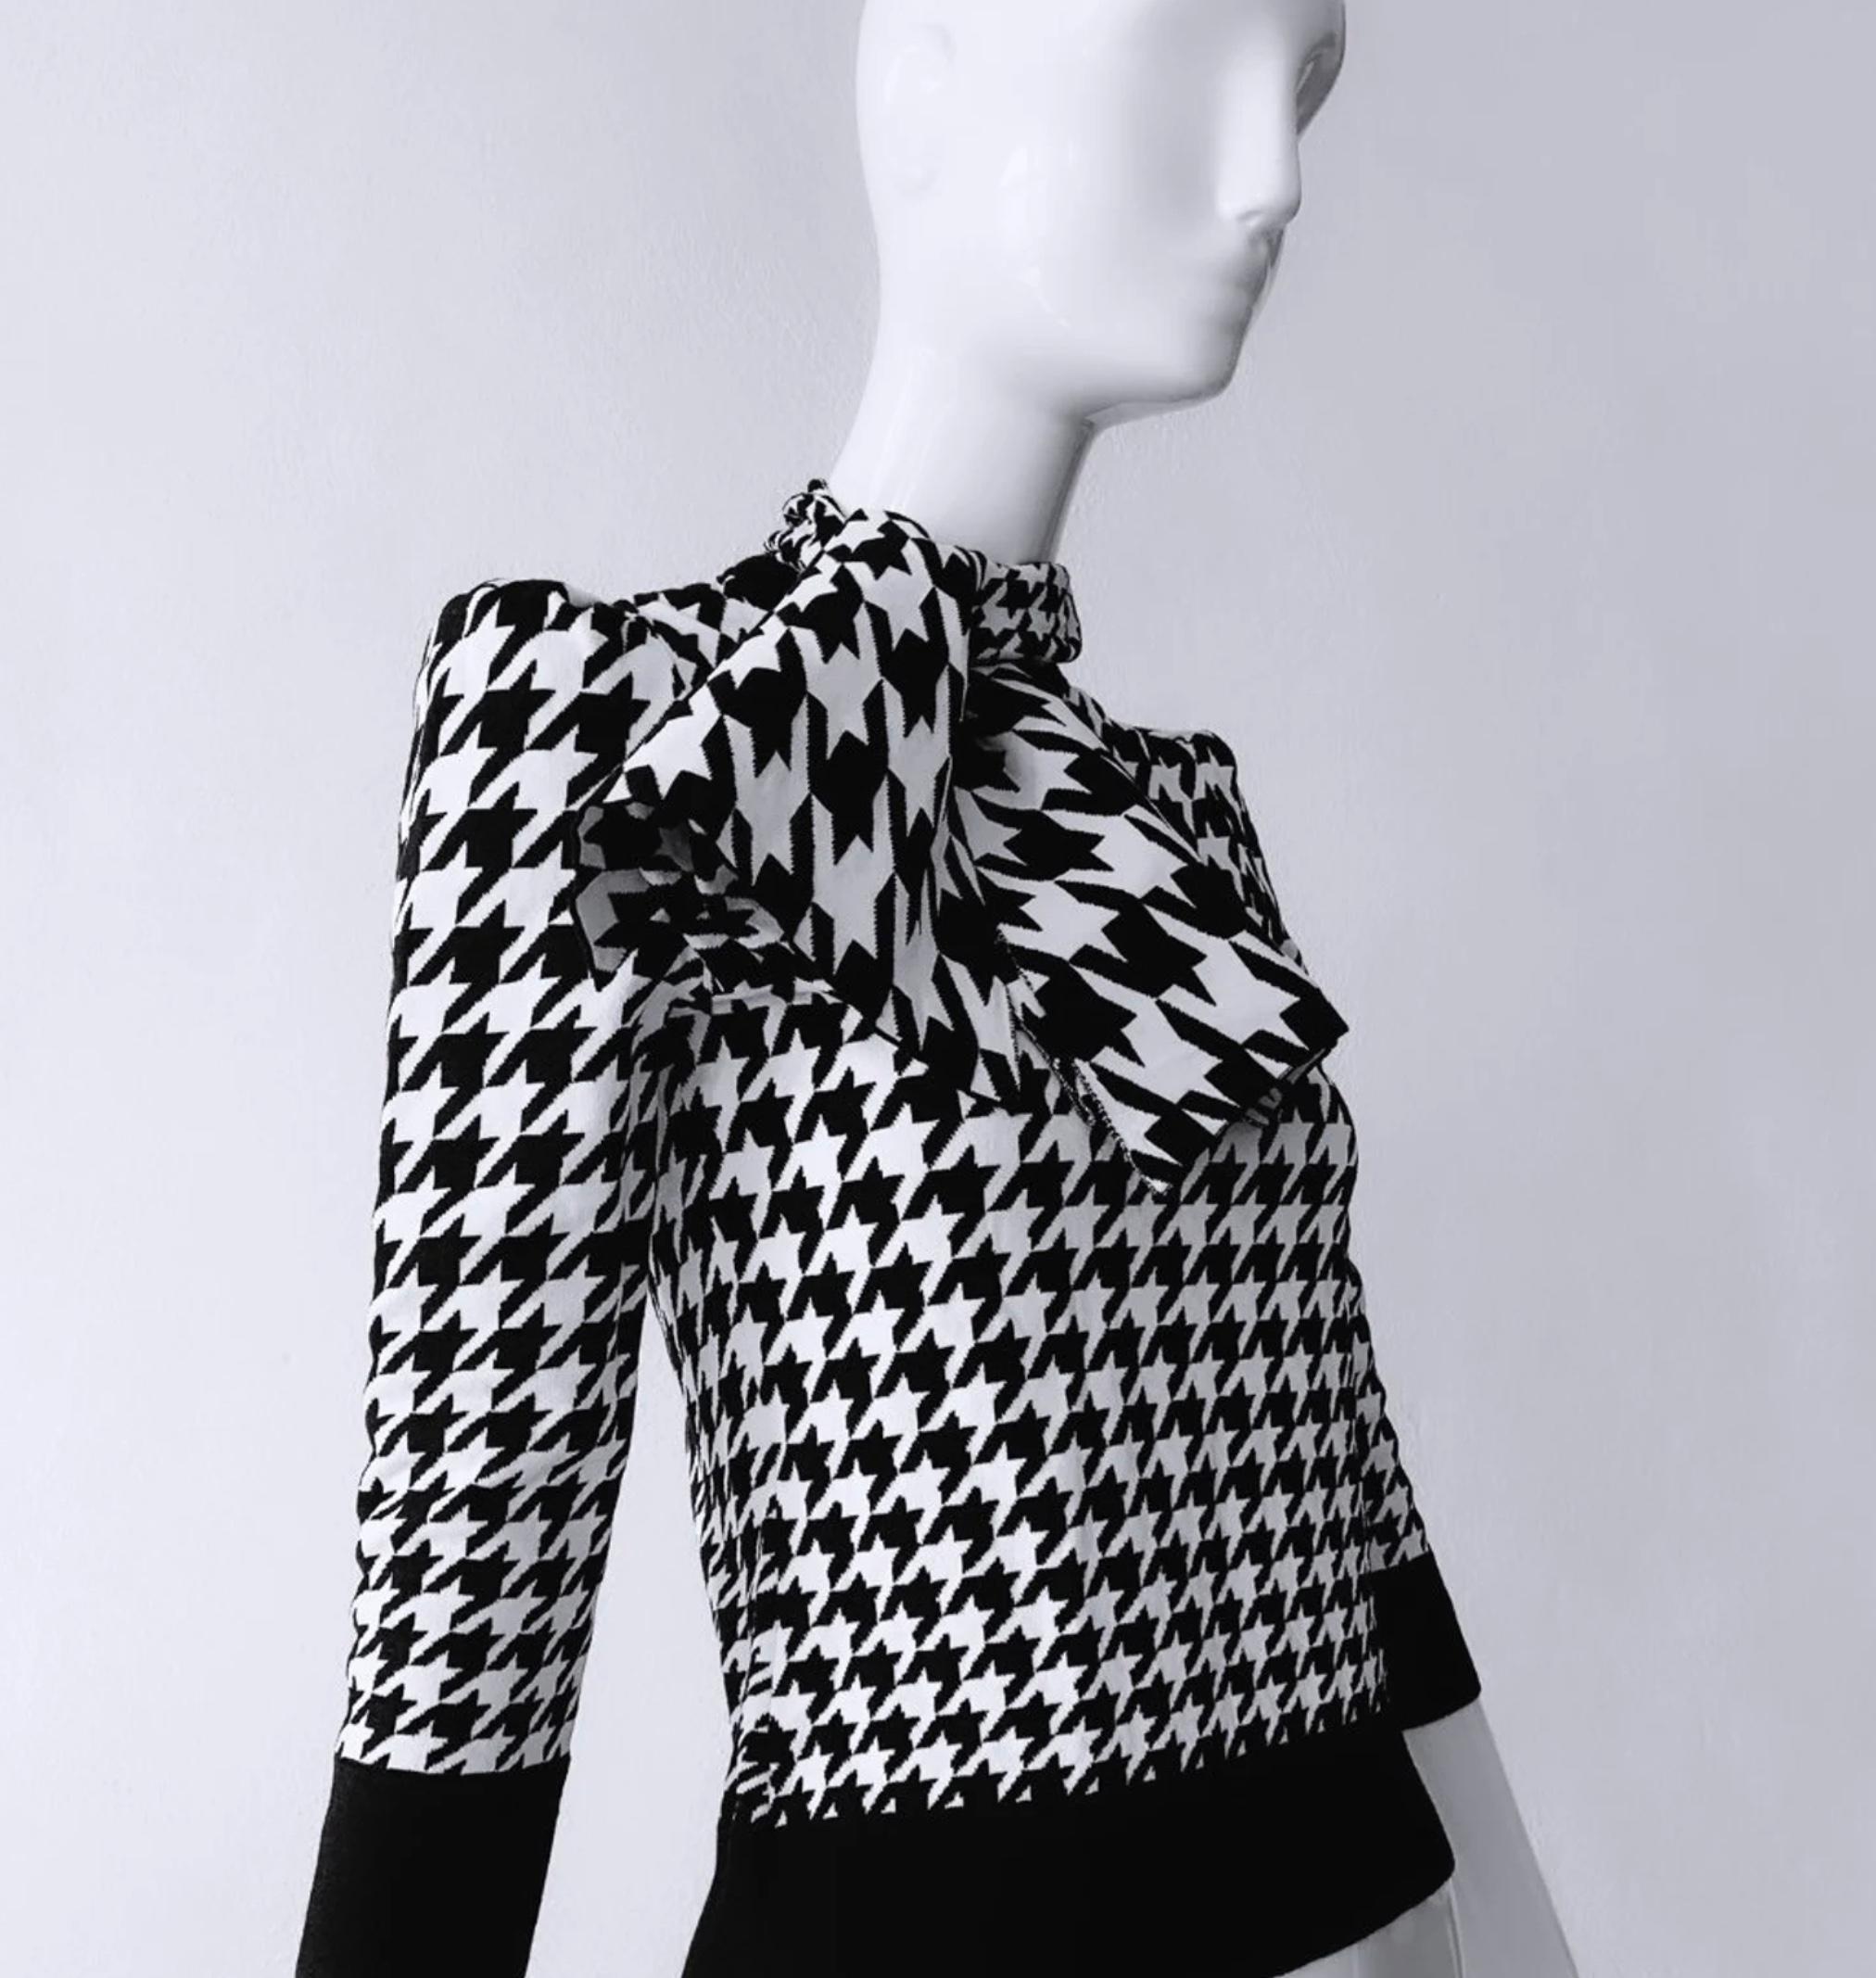 
Beautiful Alexander McQueen soft wool blend jumper with black and white houndstooth patterrn. Elegant, chic and a stunning statement piece. A gorgeous bow on the neck, super soft stetchable fabric.
McQueen also famously used this iconic print